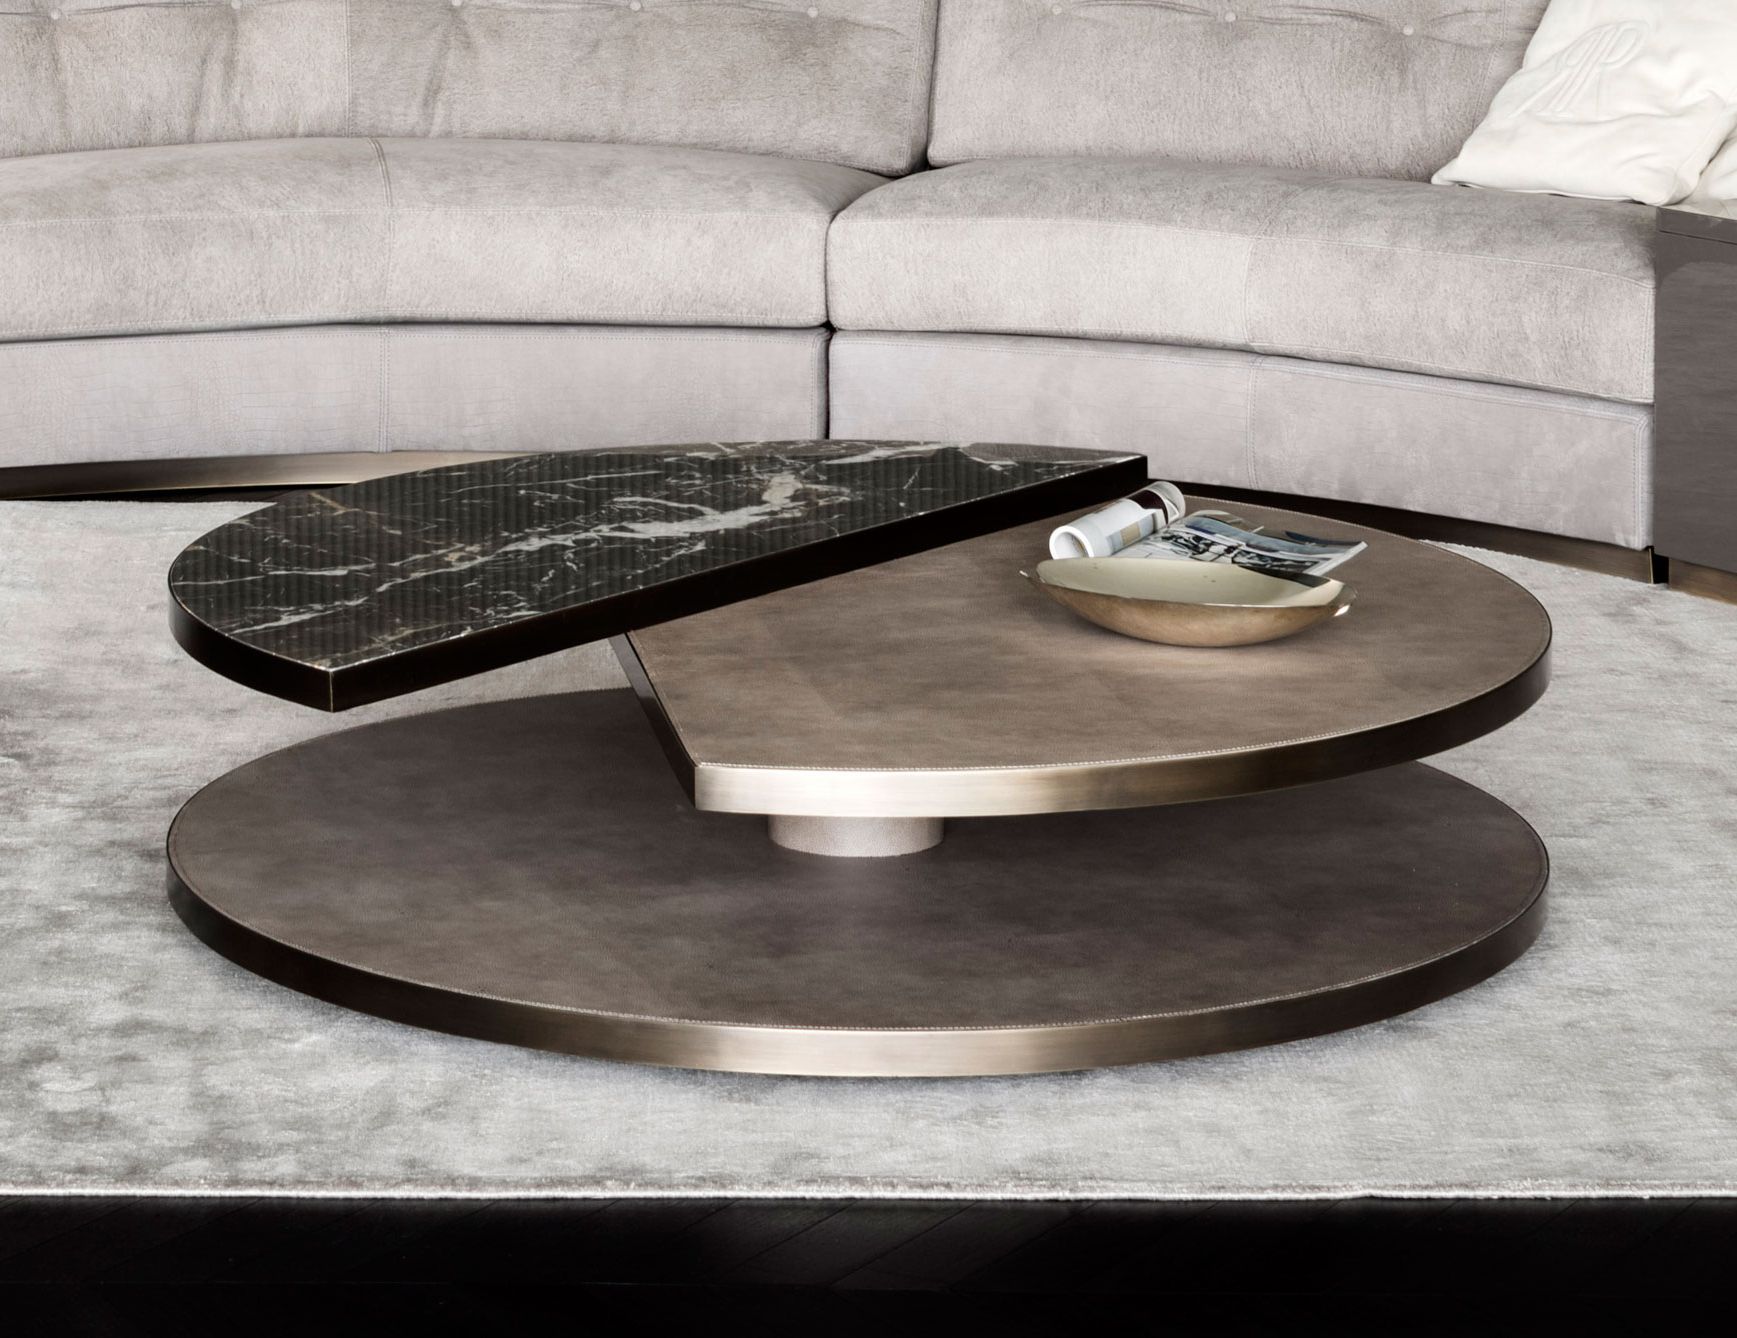 Most Recent Marble And White Coffee Tables In Nella Vetrina Rugiano Moon Upholstered Leather With Marble (View 16 of 20)